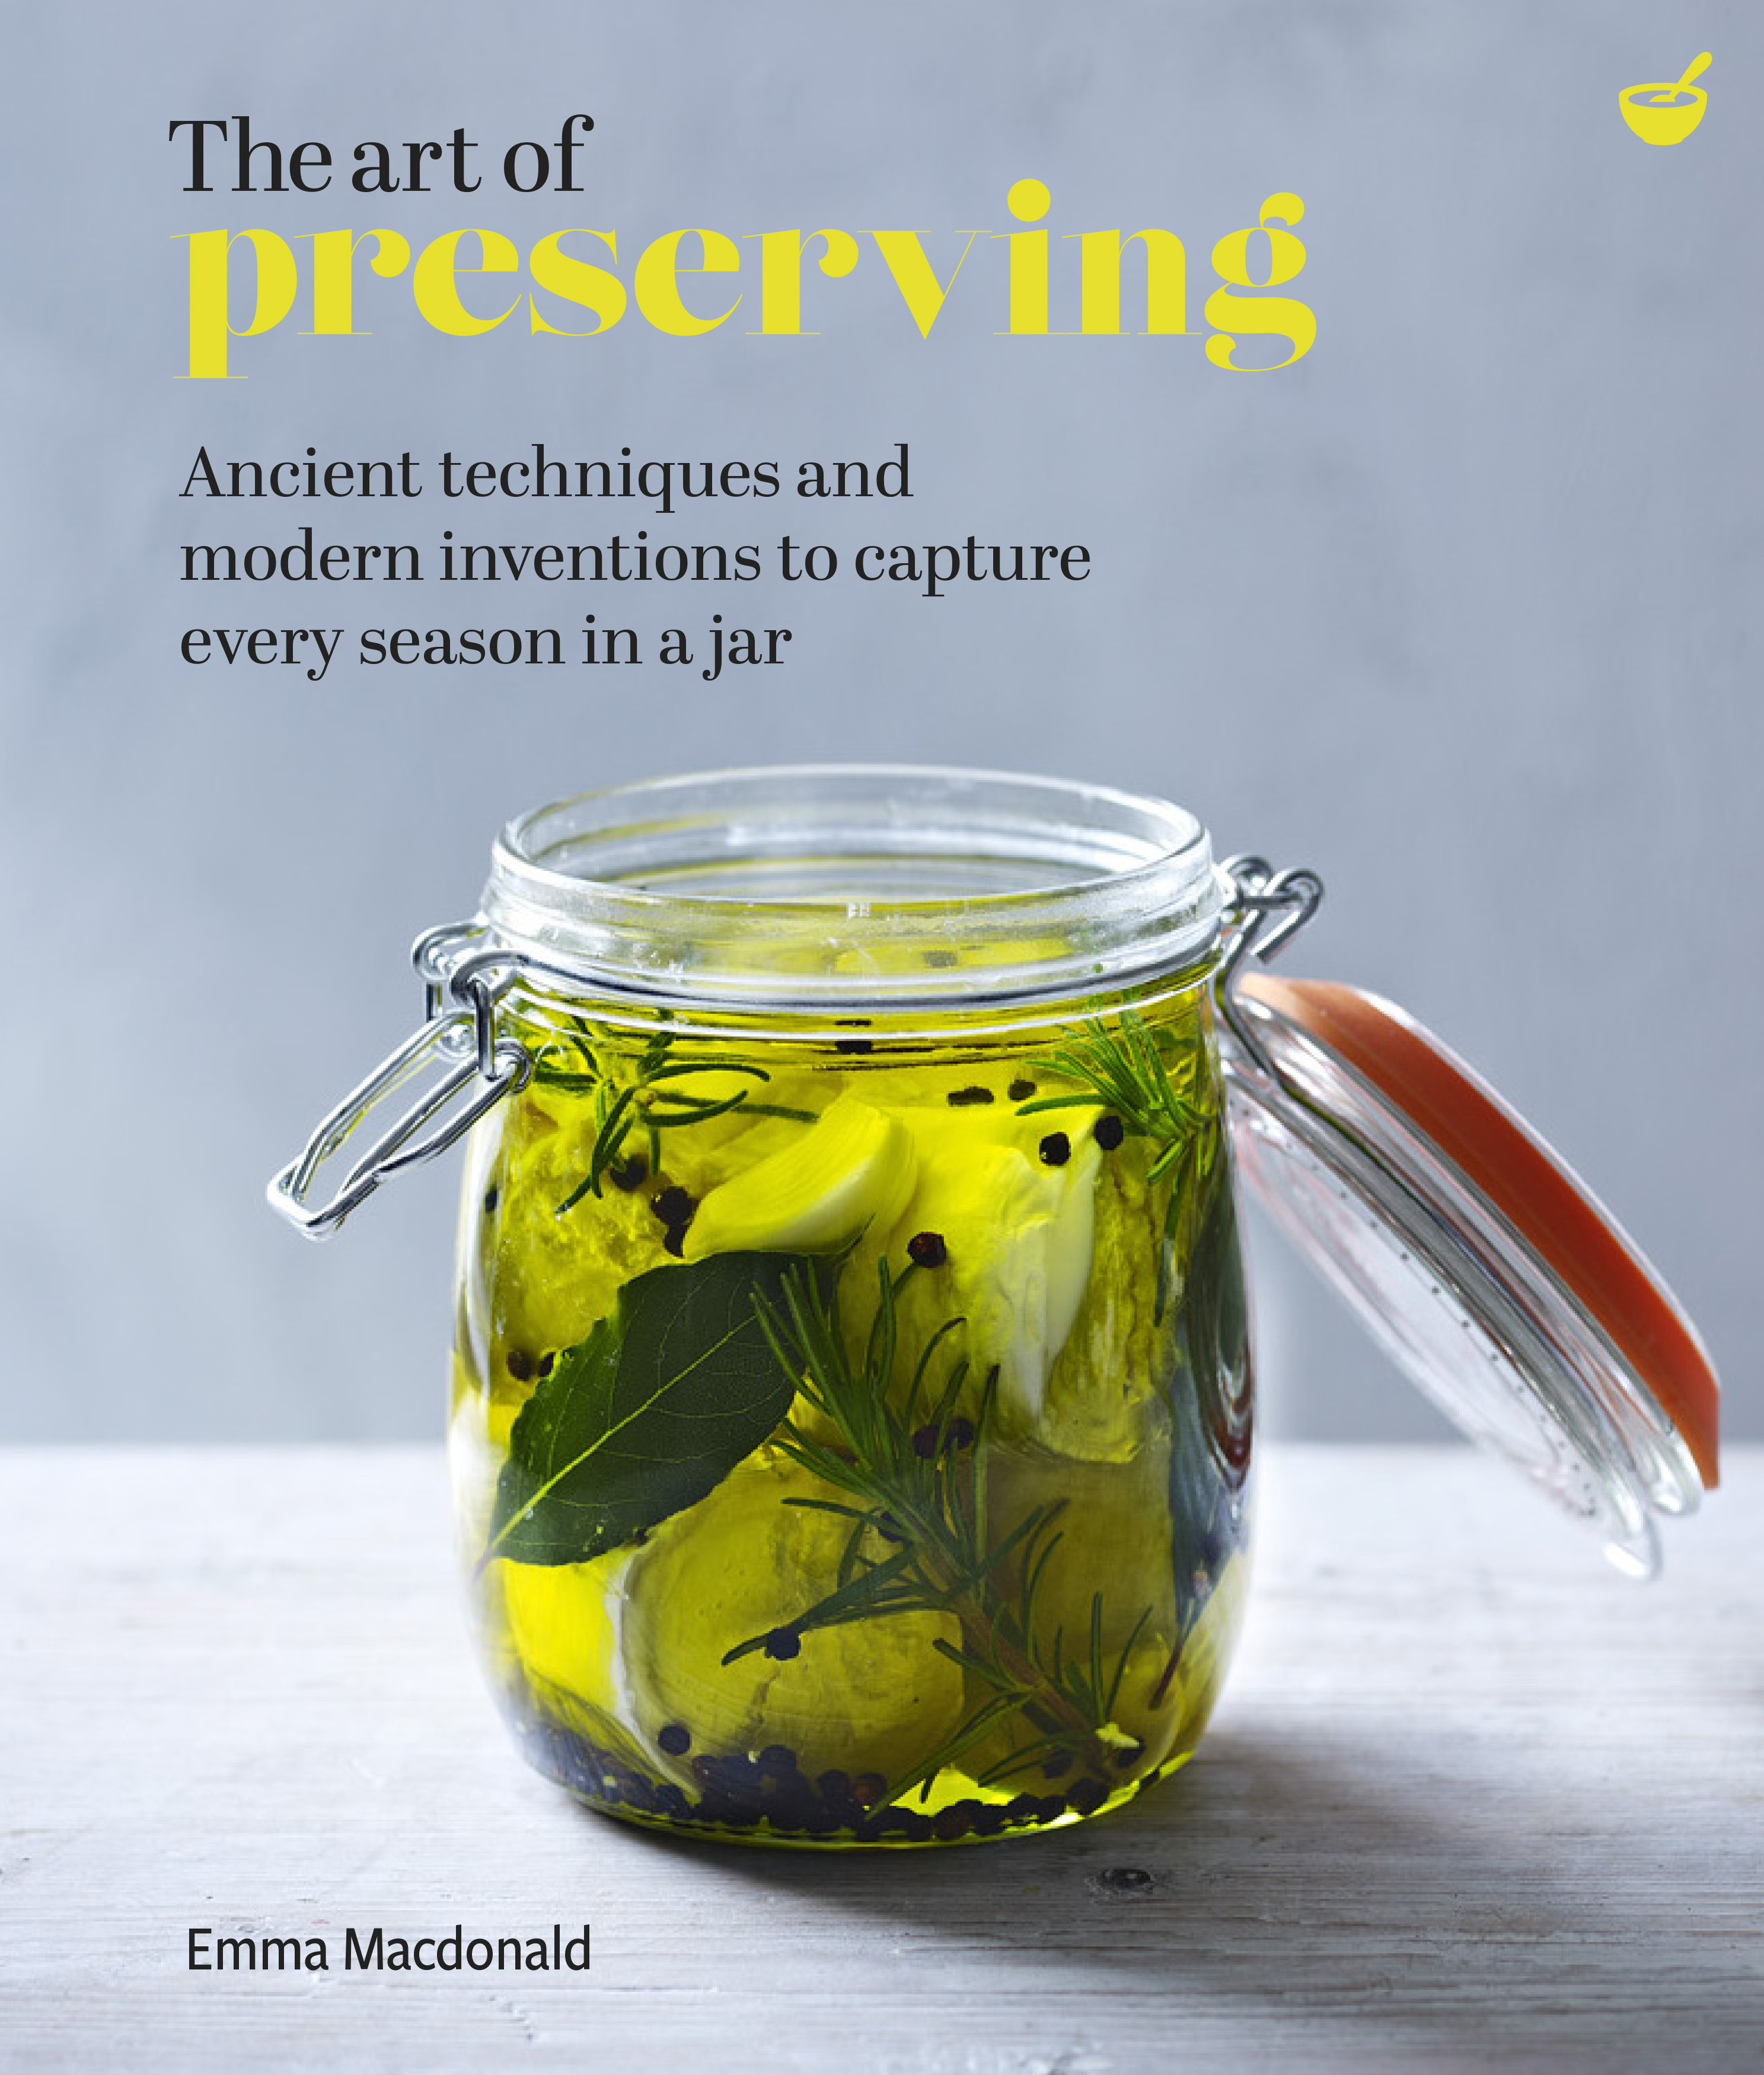 The Art of Preserving : Ancient techniques and modern inventions to capture every season in a jar | Macdonald, Emma